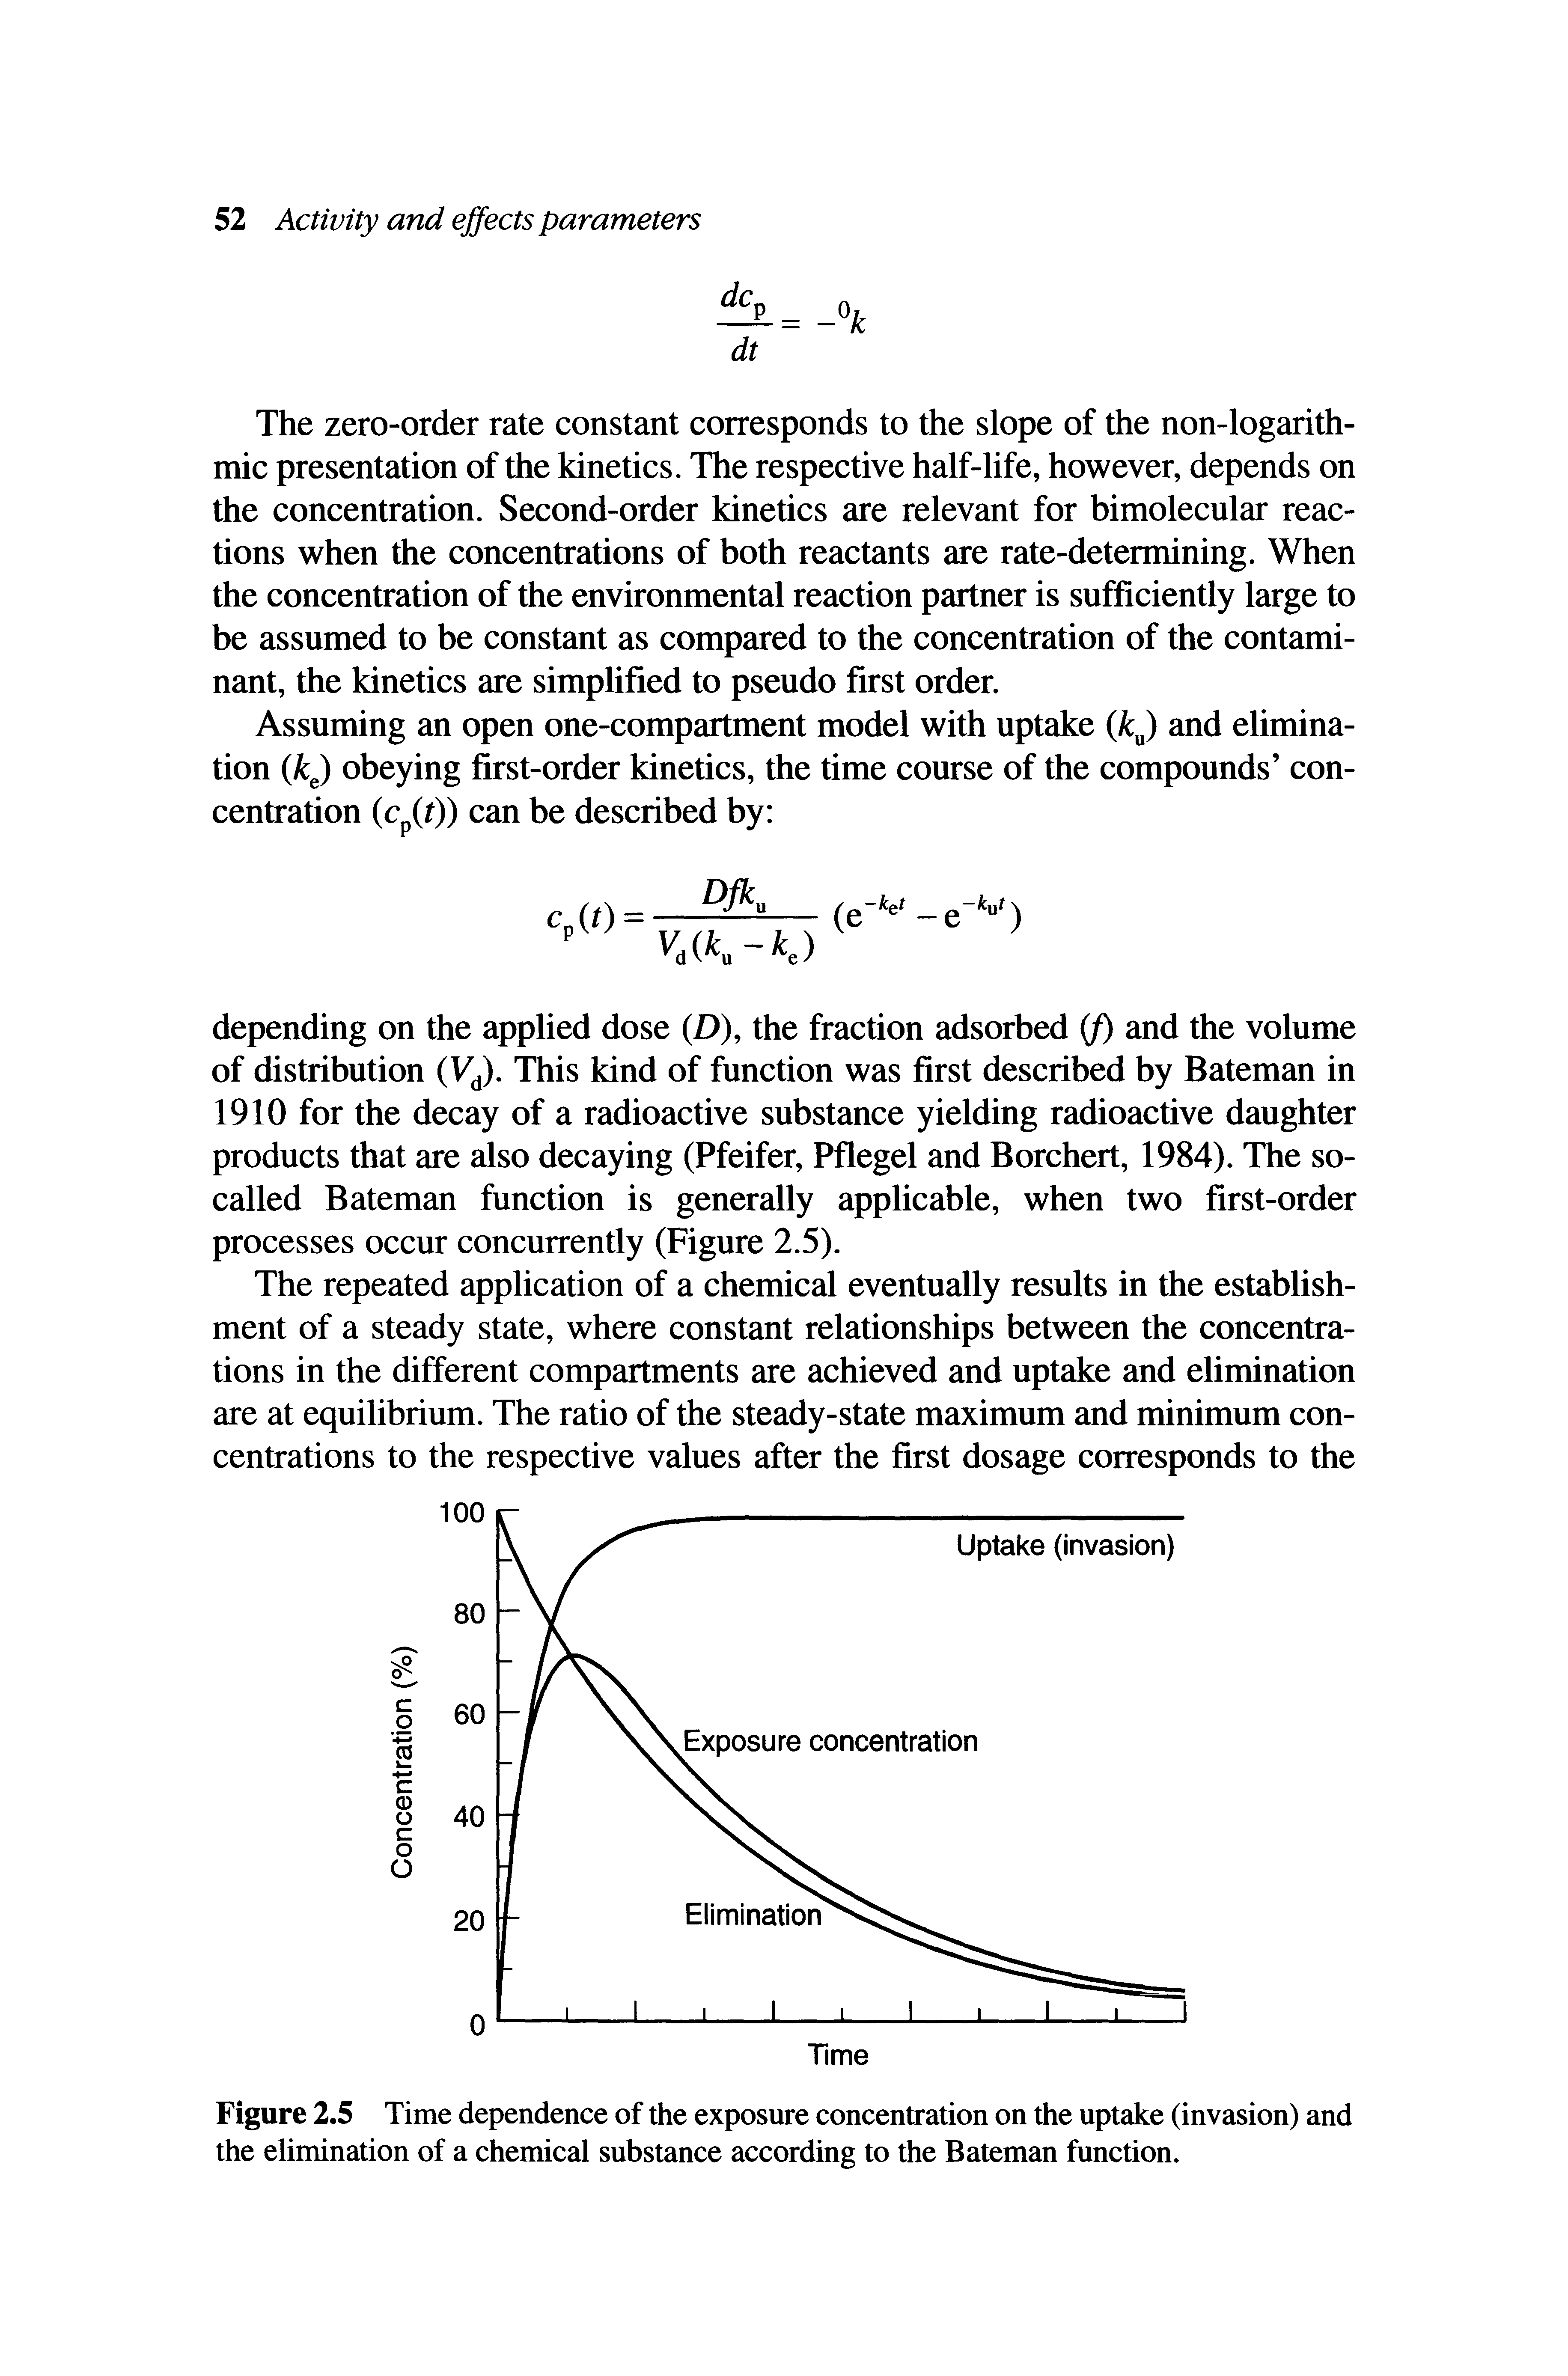 Figure 2.5 Time dependence of the exposure concentration on the uptake (invasion) and the elimination of a chemical substance according to the Bateman function.